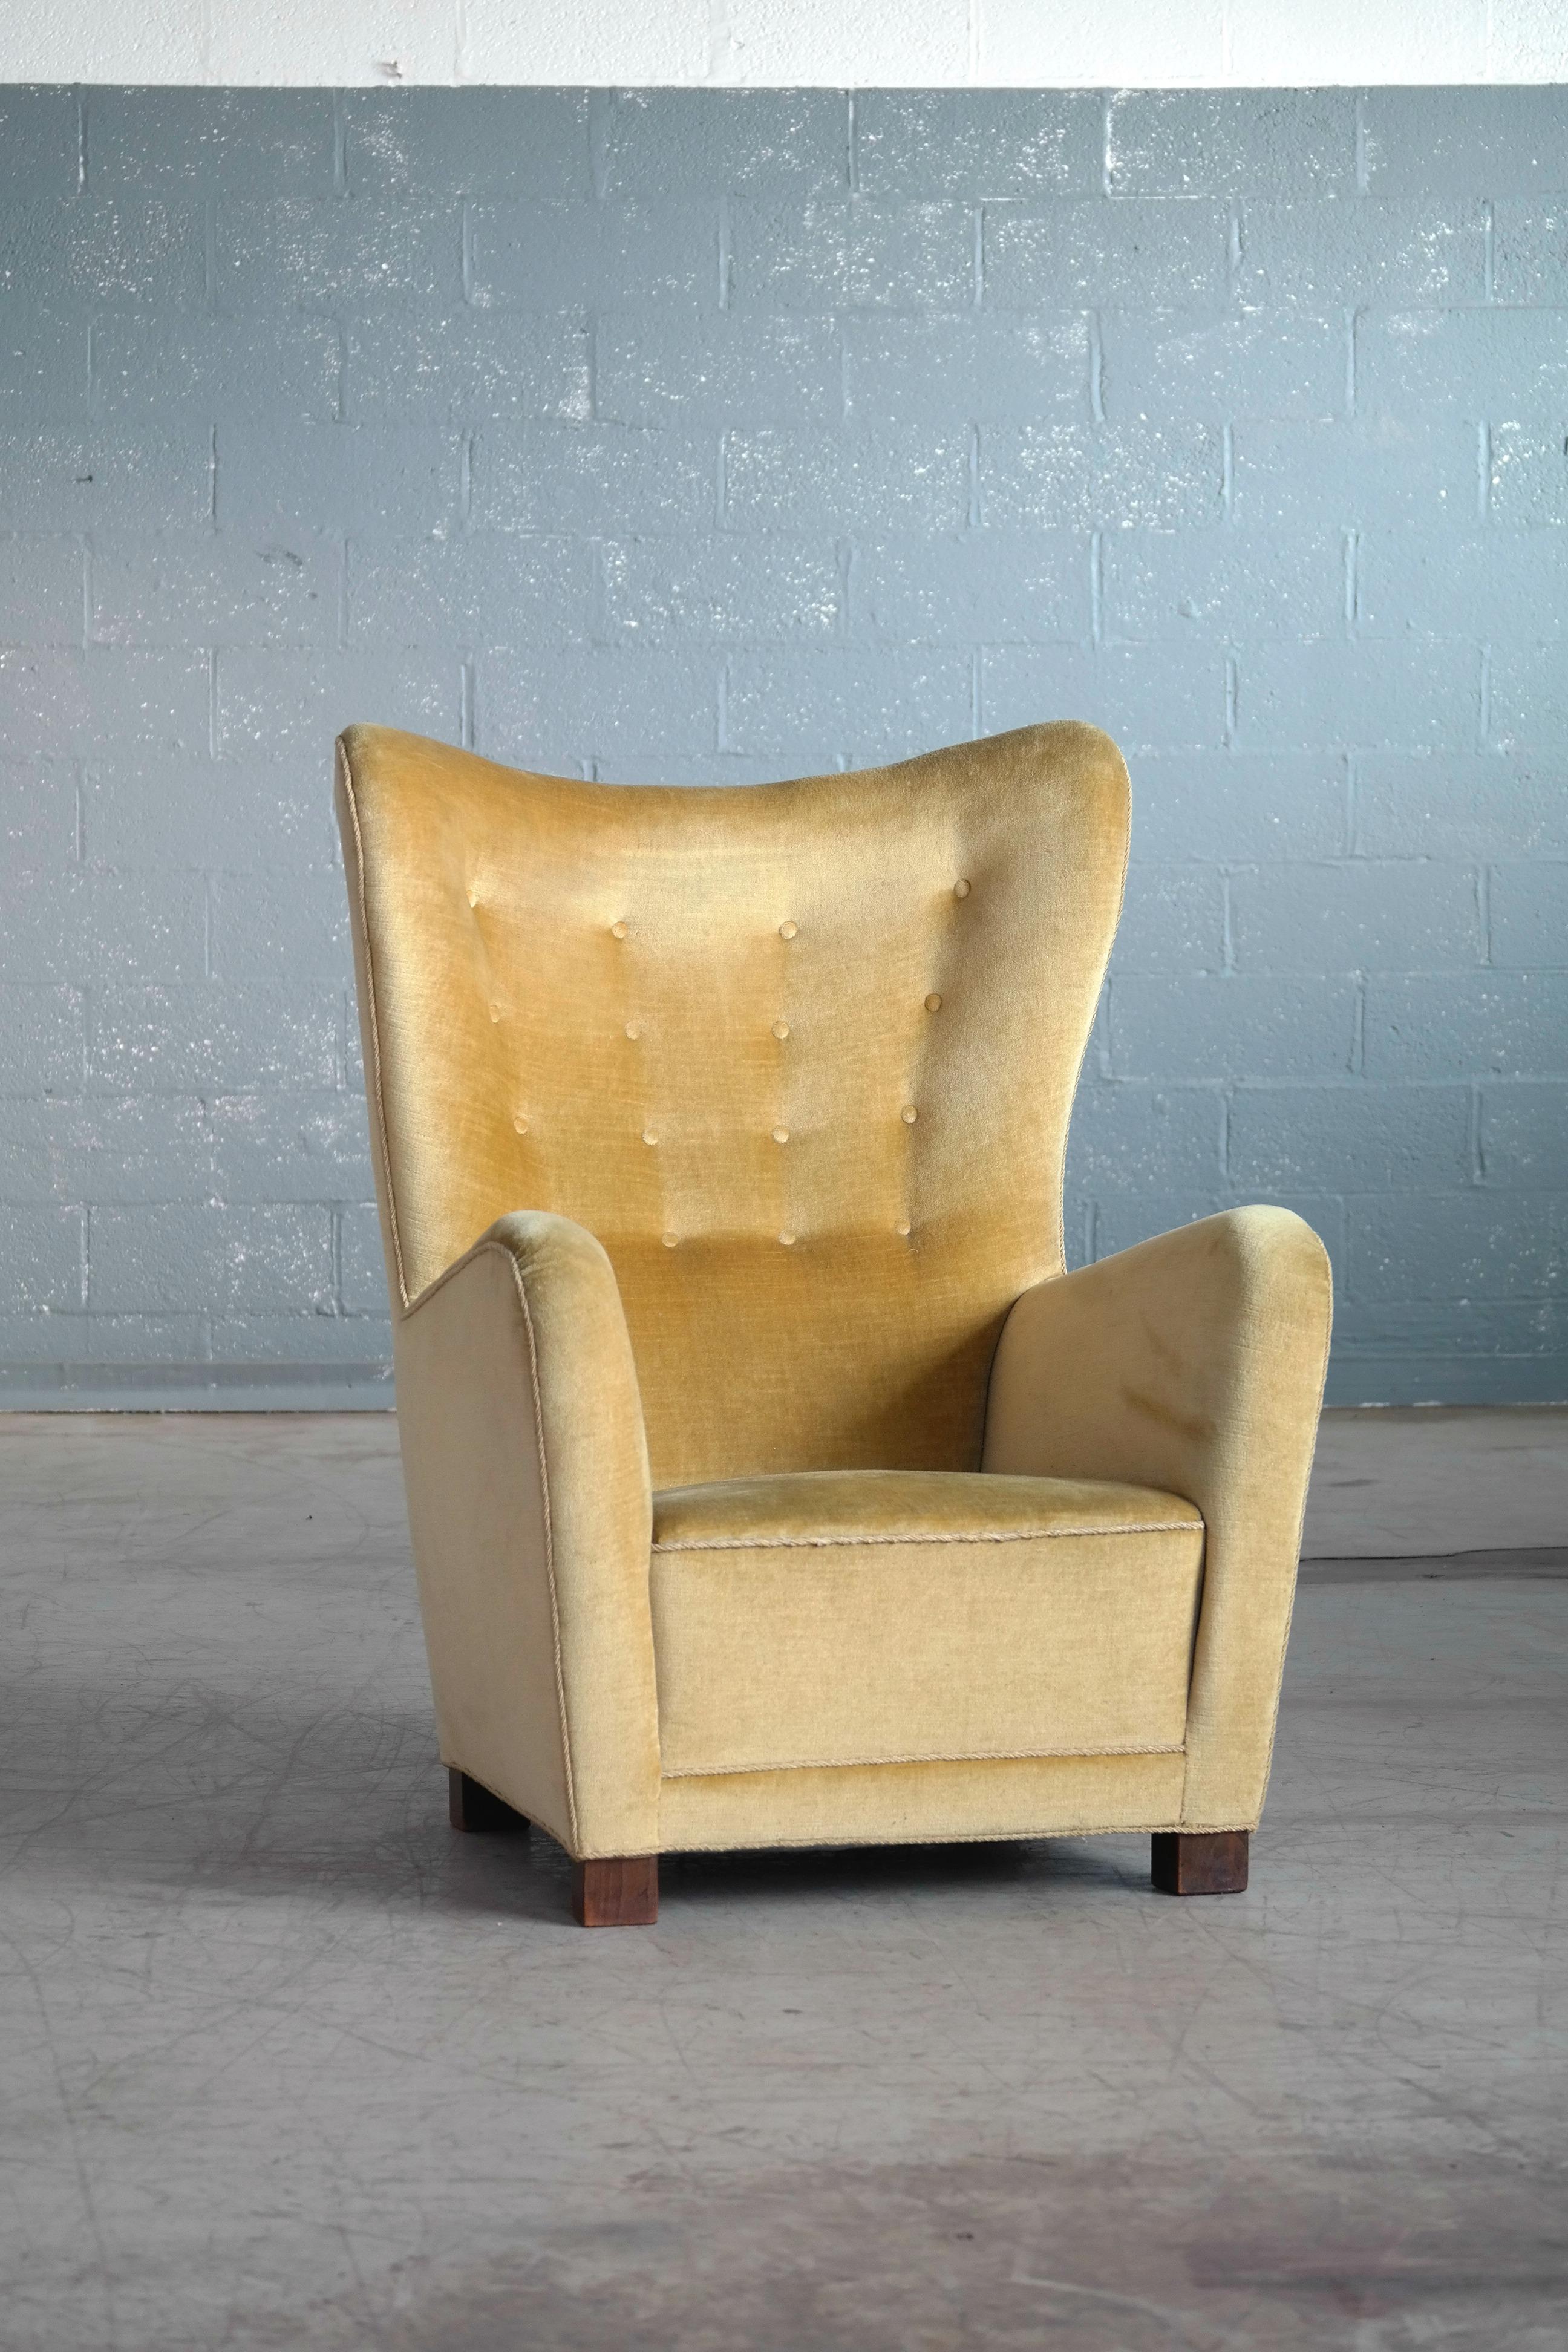 Sought after Fritz Hansen Model 1672 high back lounge chair made circa 1942. The chairs was first seen on page 12 in Fritz Hansen's 1942 catalog. The model 1672 has become of the most sought after and iconic high back chairs to come out of the